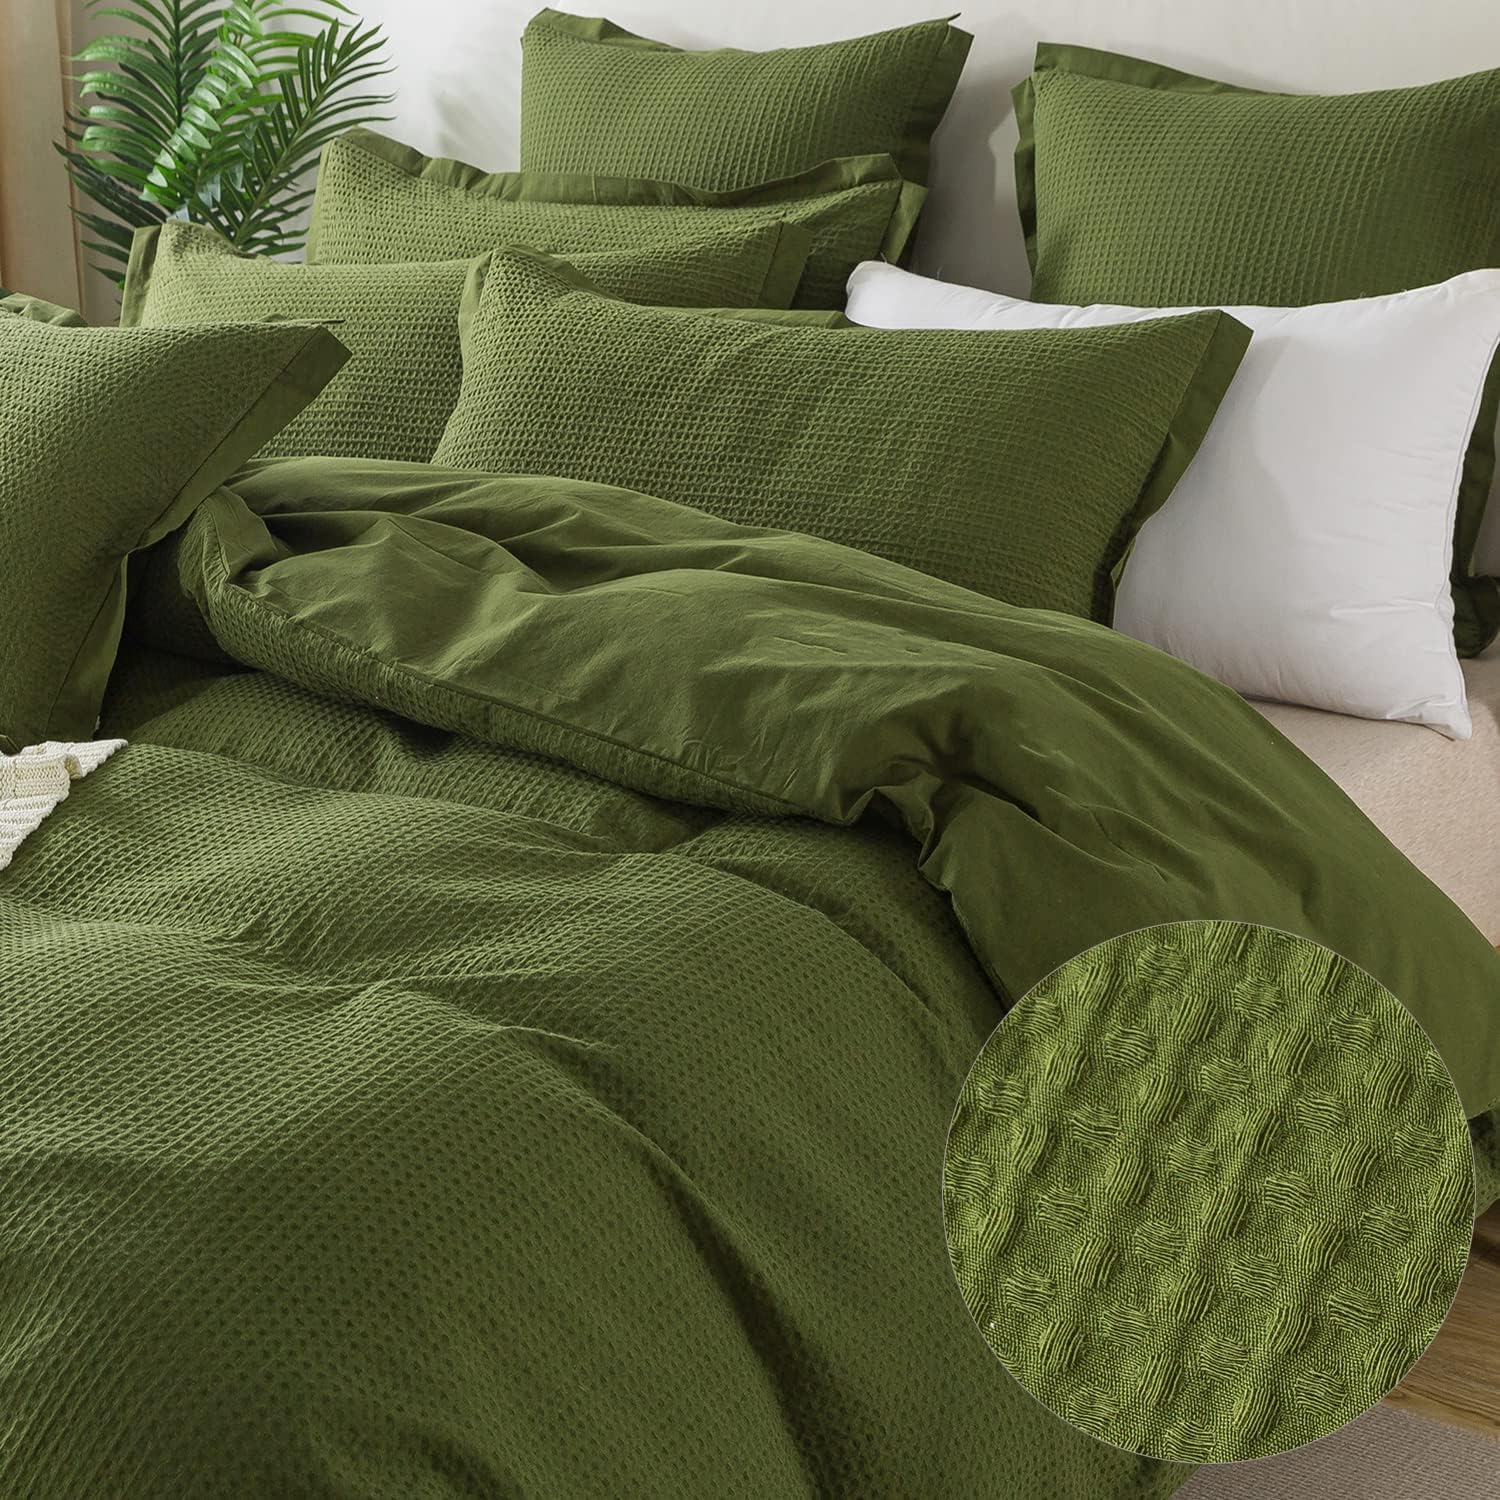 FADFAY Dark Green Duvet Cover Set King/Cal King Waffle Weave Knit Reversible 100% Washed Cotton Sage Green Textured Duvet Covers Boho Comforter Cover Christmas Bedding Soft Breathable All Season